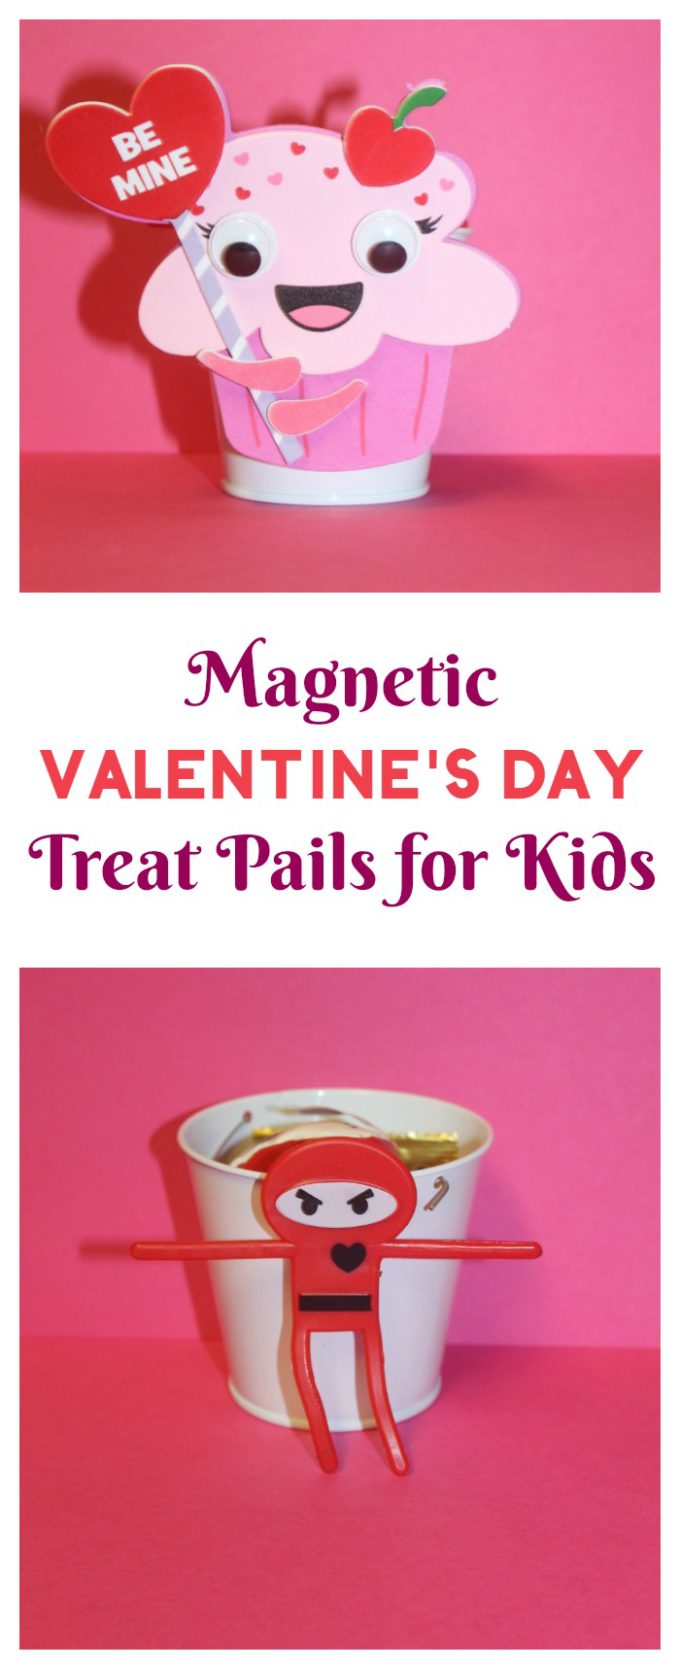 Make a DIY magnetic Valentine's Day treat pail for kids in just minutes. Makes for great party favors too!